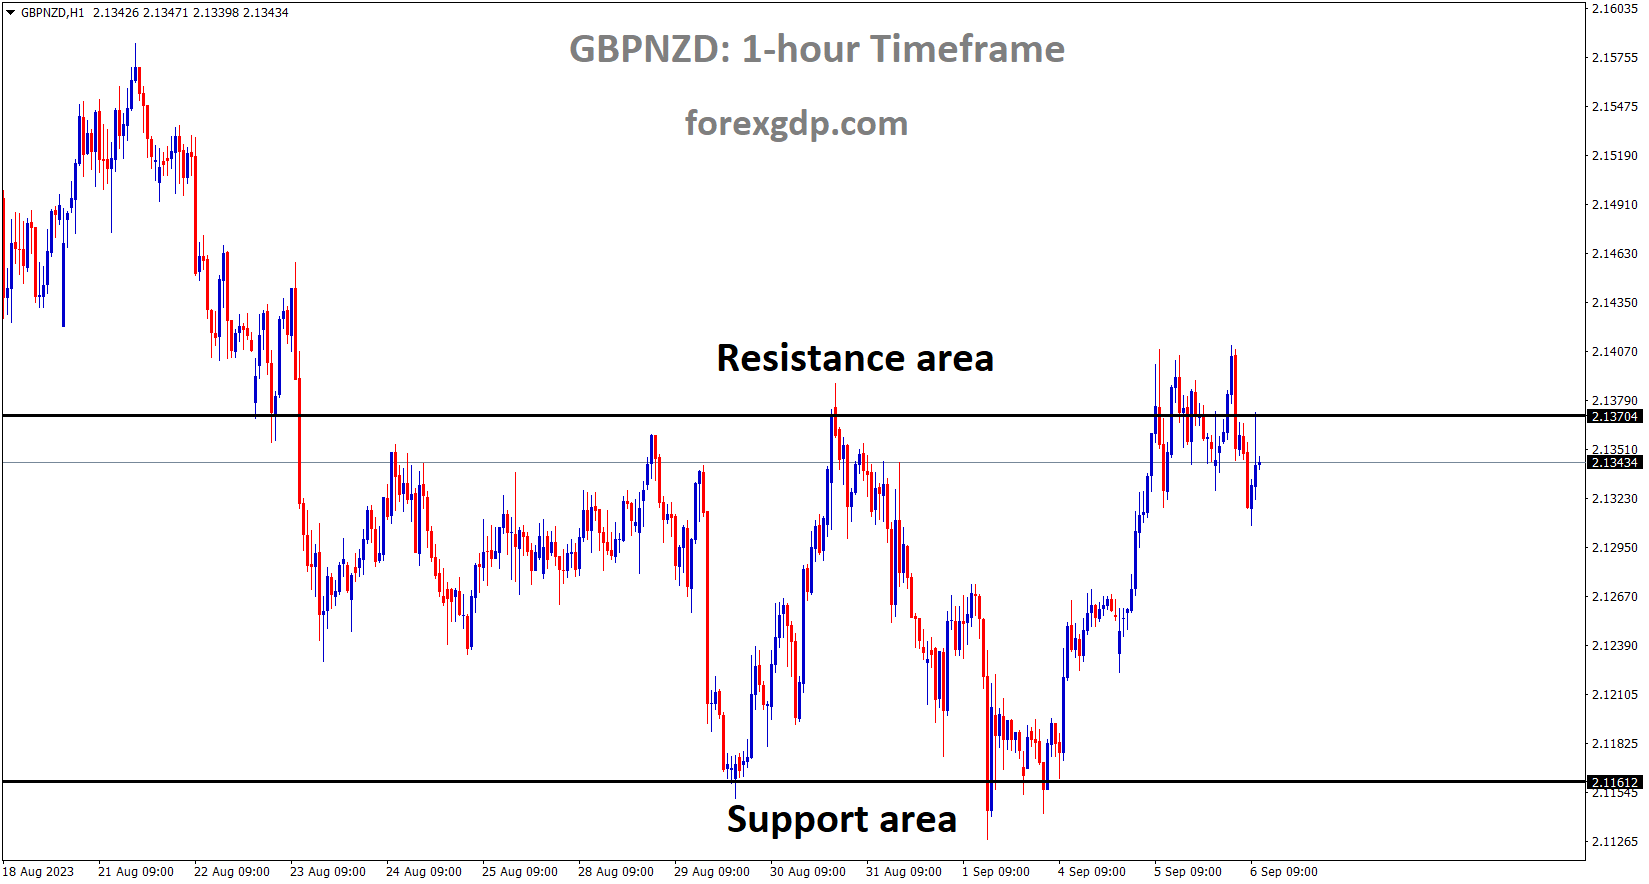 GBPNZD is moving in the Box pattern and the market has fallen from the resistance area of the pattern